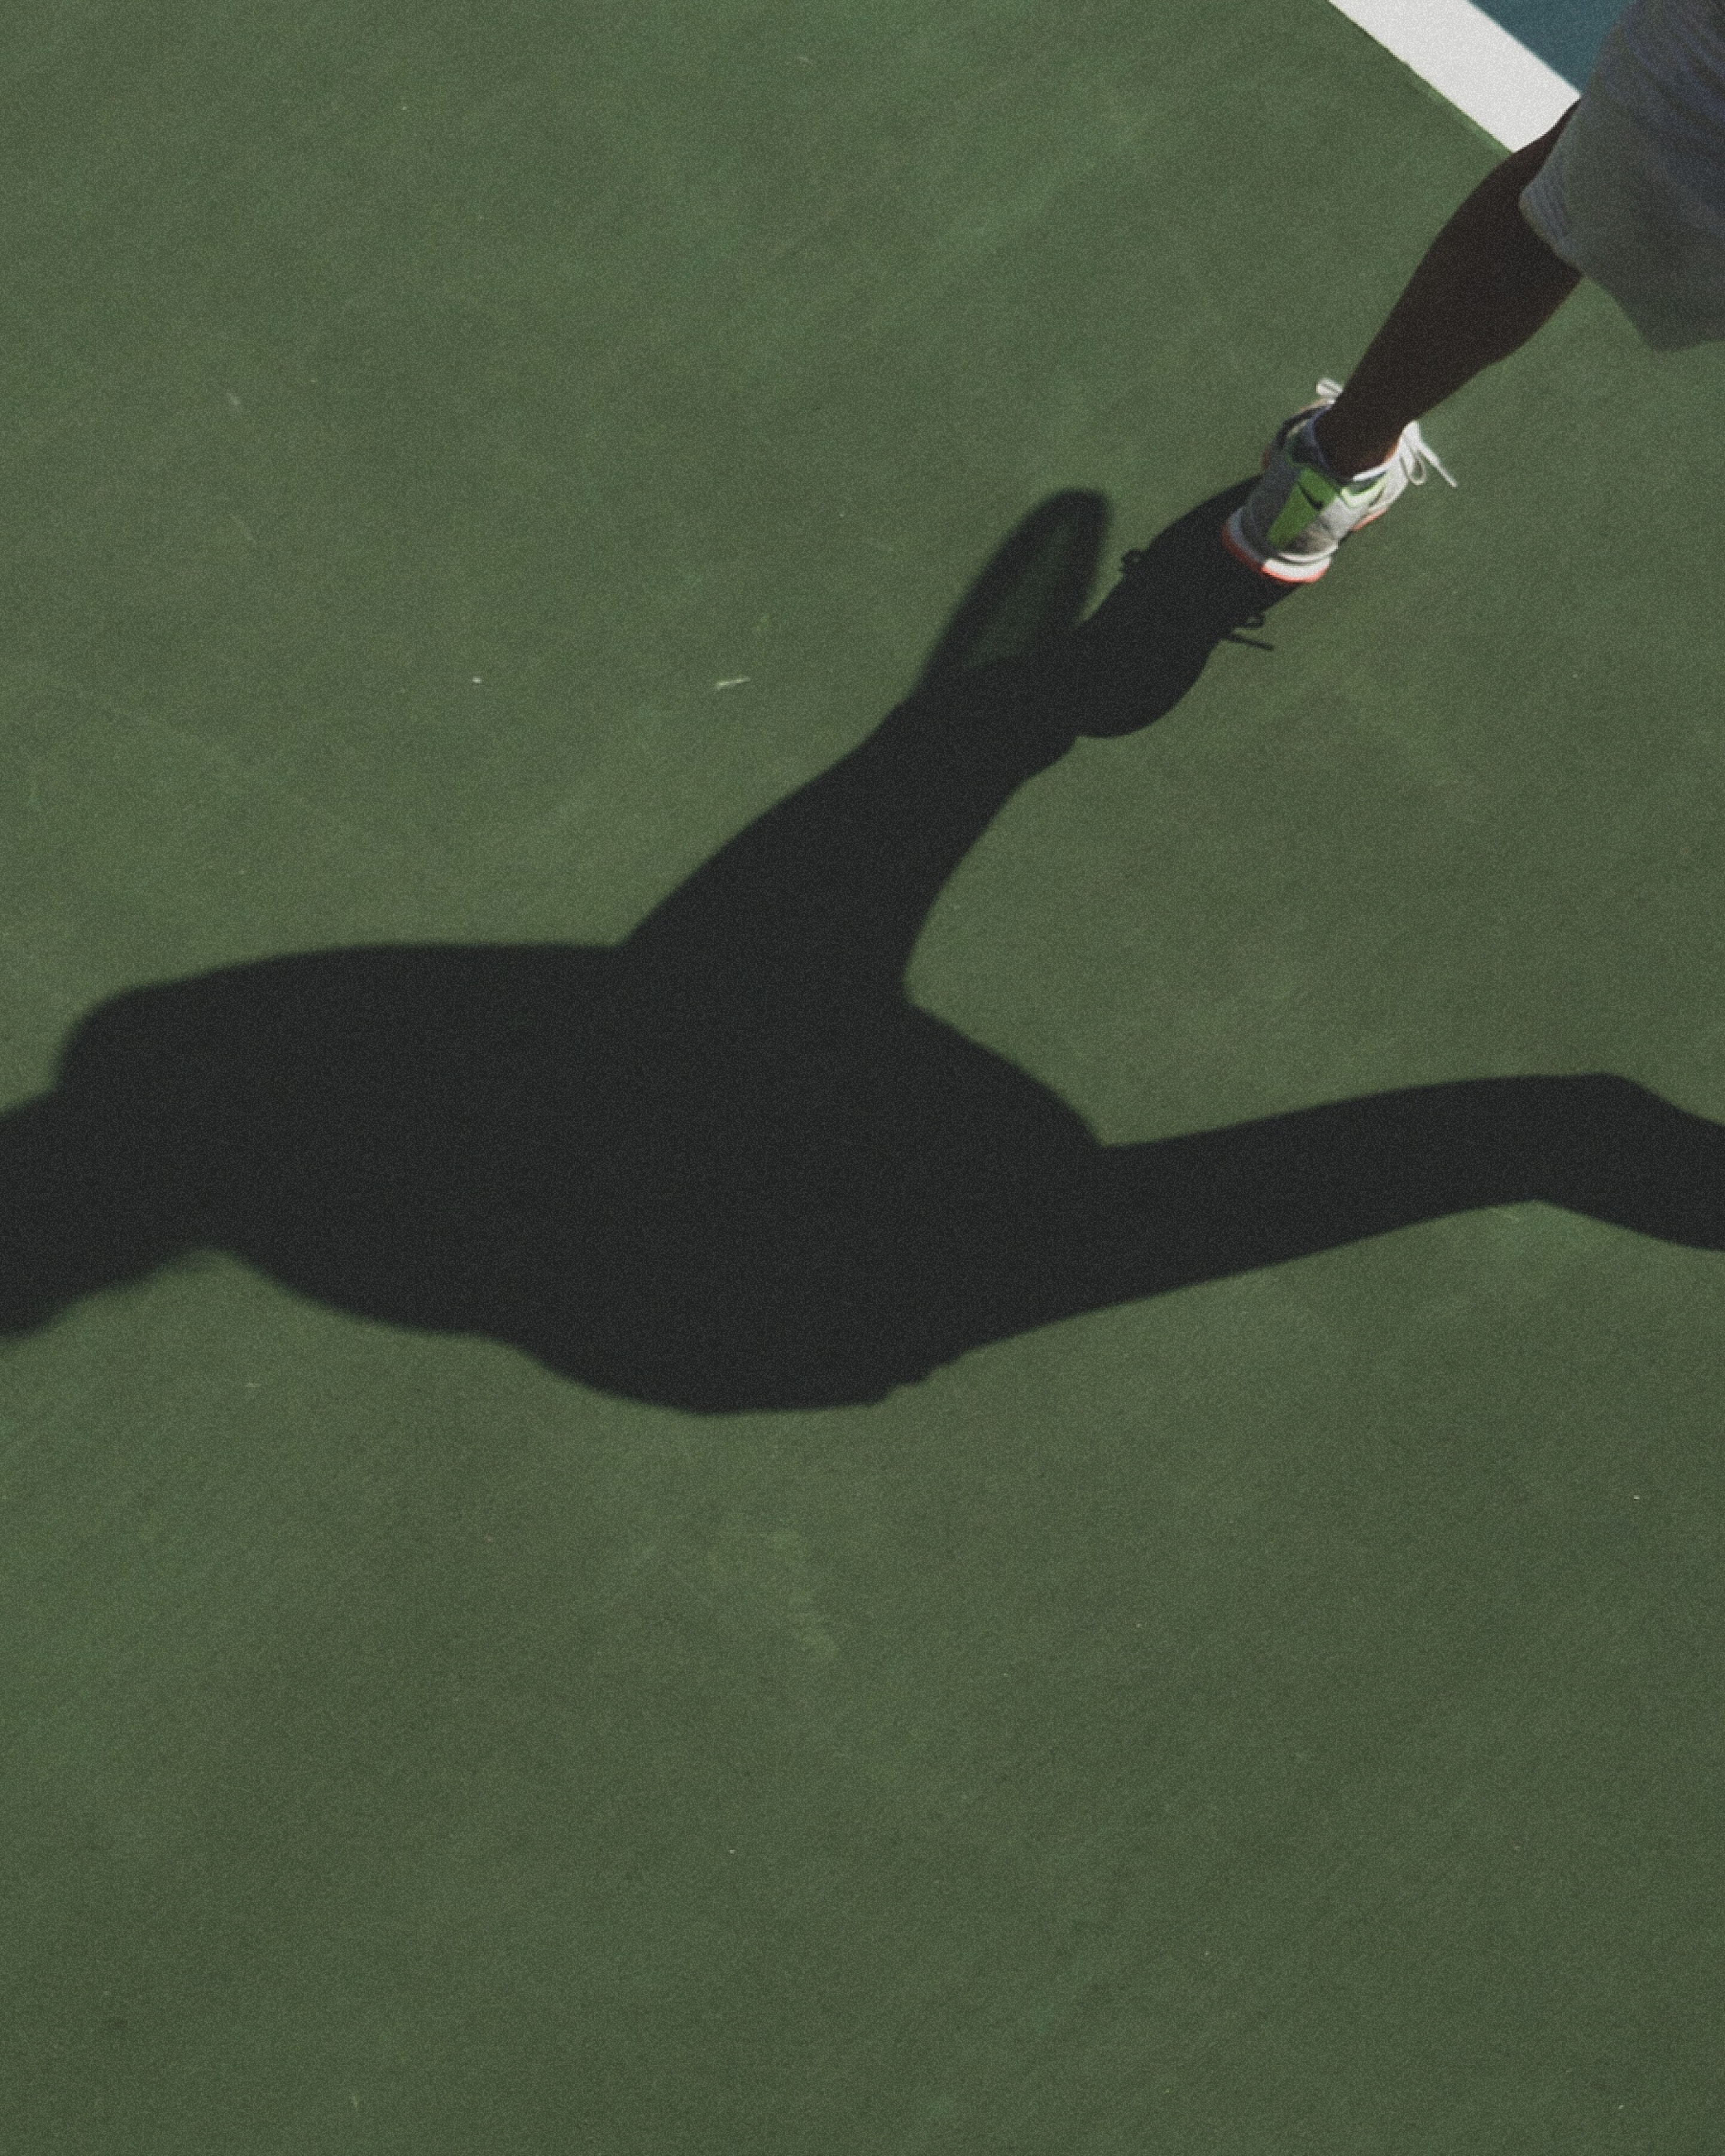 a player's shadow on the tennis court